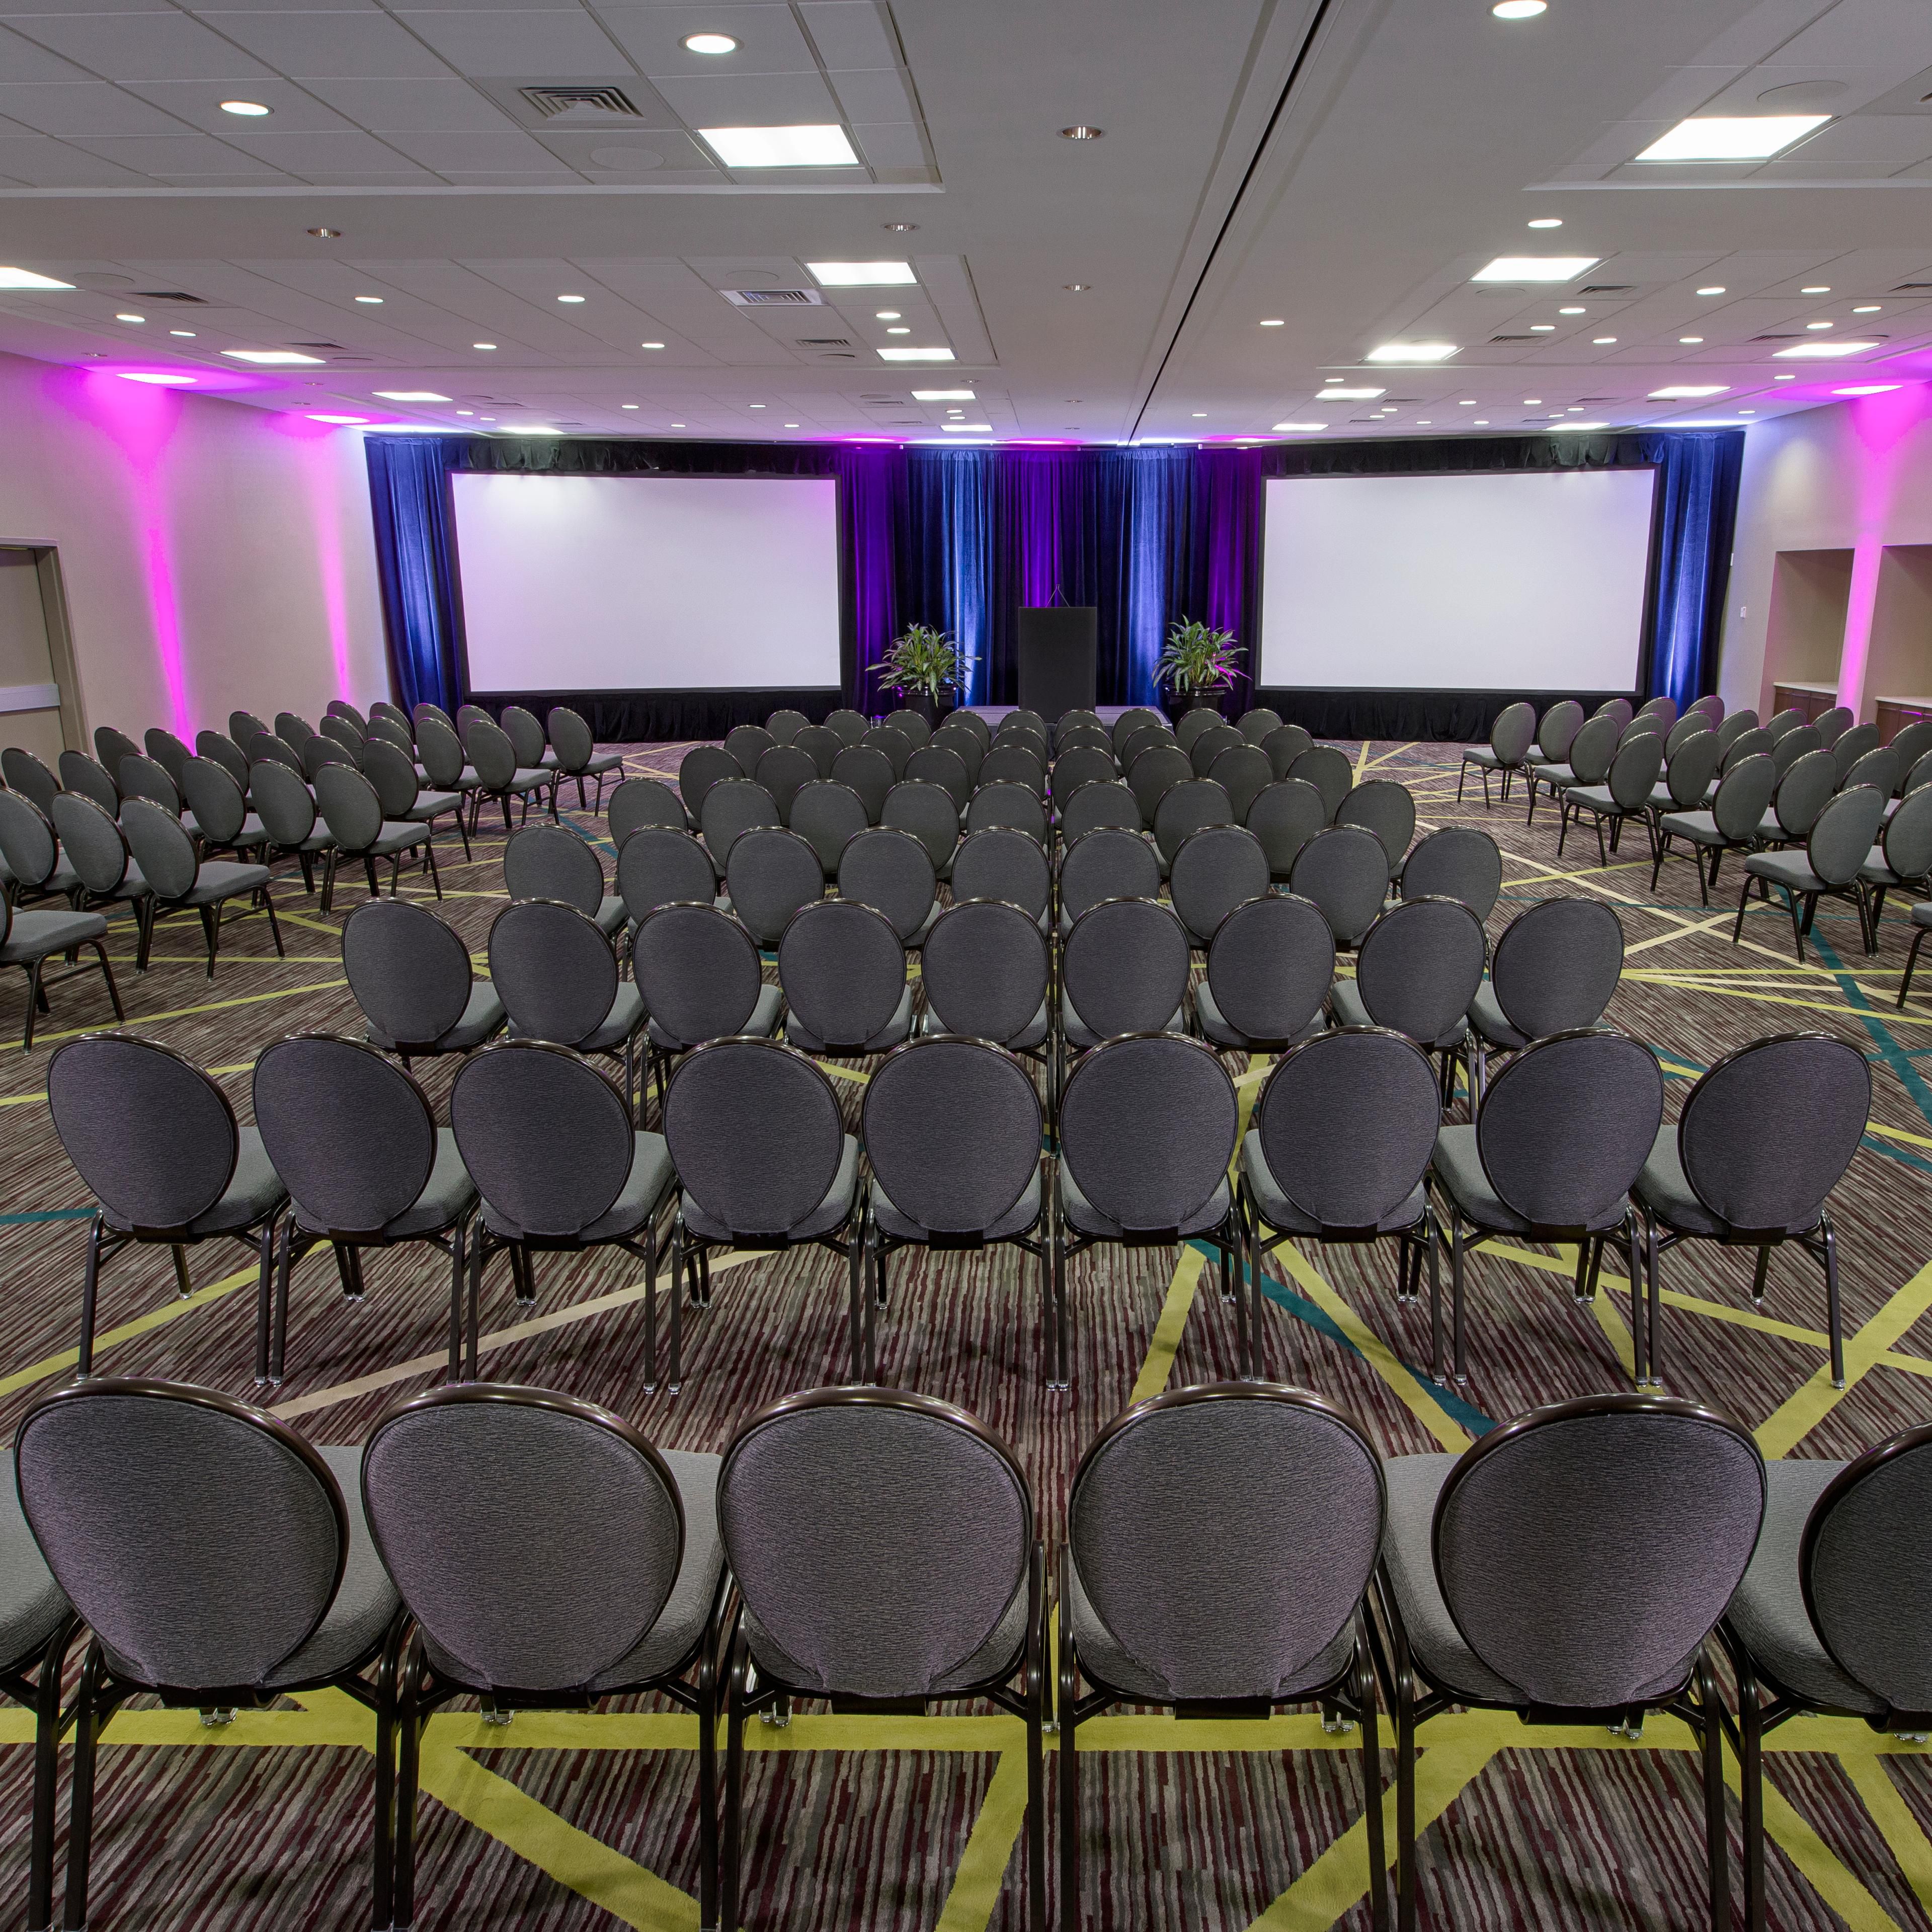 Atlanta Ballroom, perfect for large groups or events.